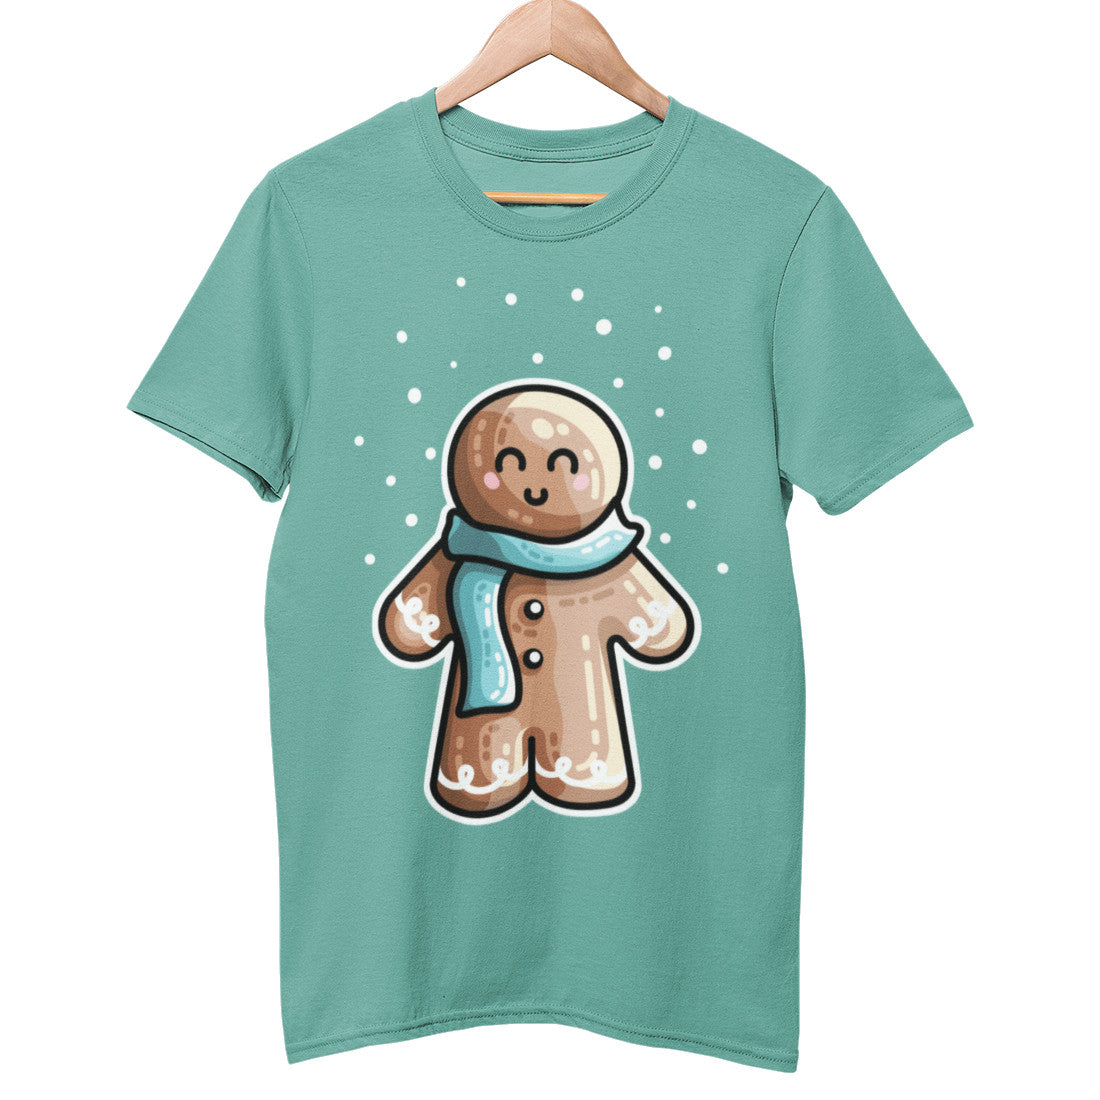 A green bay coloured unisex crewneck t-shirt on a hanger with a design of a kawaii cute gingerbread person standing in the snow and wearing a blue scarf